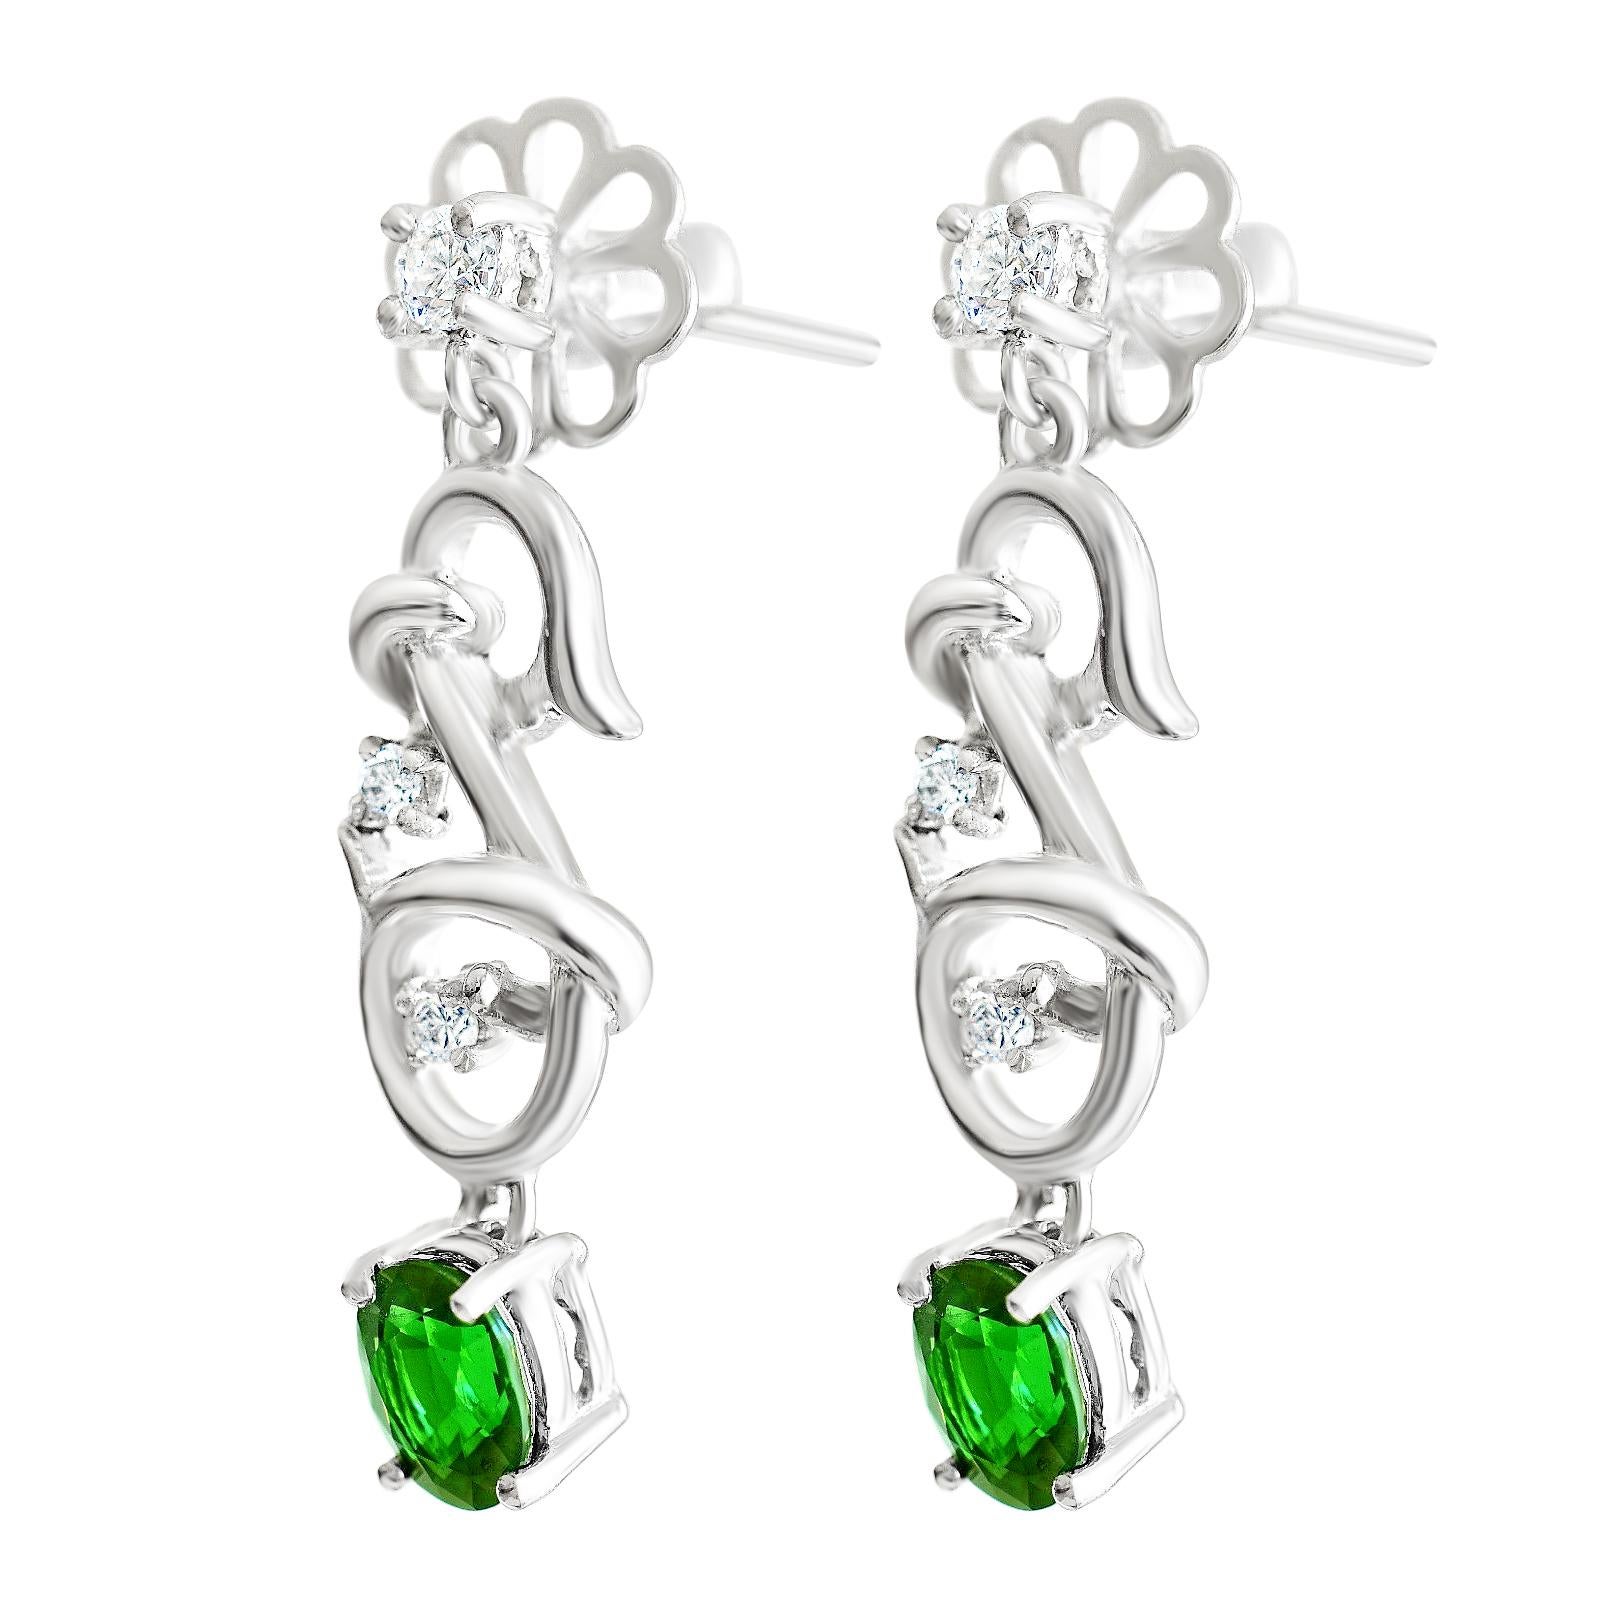 Handmade Tsavorite Garnet & diamond earrings set in 18 carat white gold drops.

Tsavorite Garnets are quite rare with small deposits being found only in Kenya, Madagascar, Pakistan & Antarctica.

They only received prominence after they were